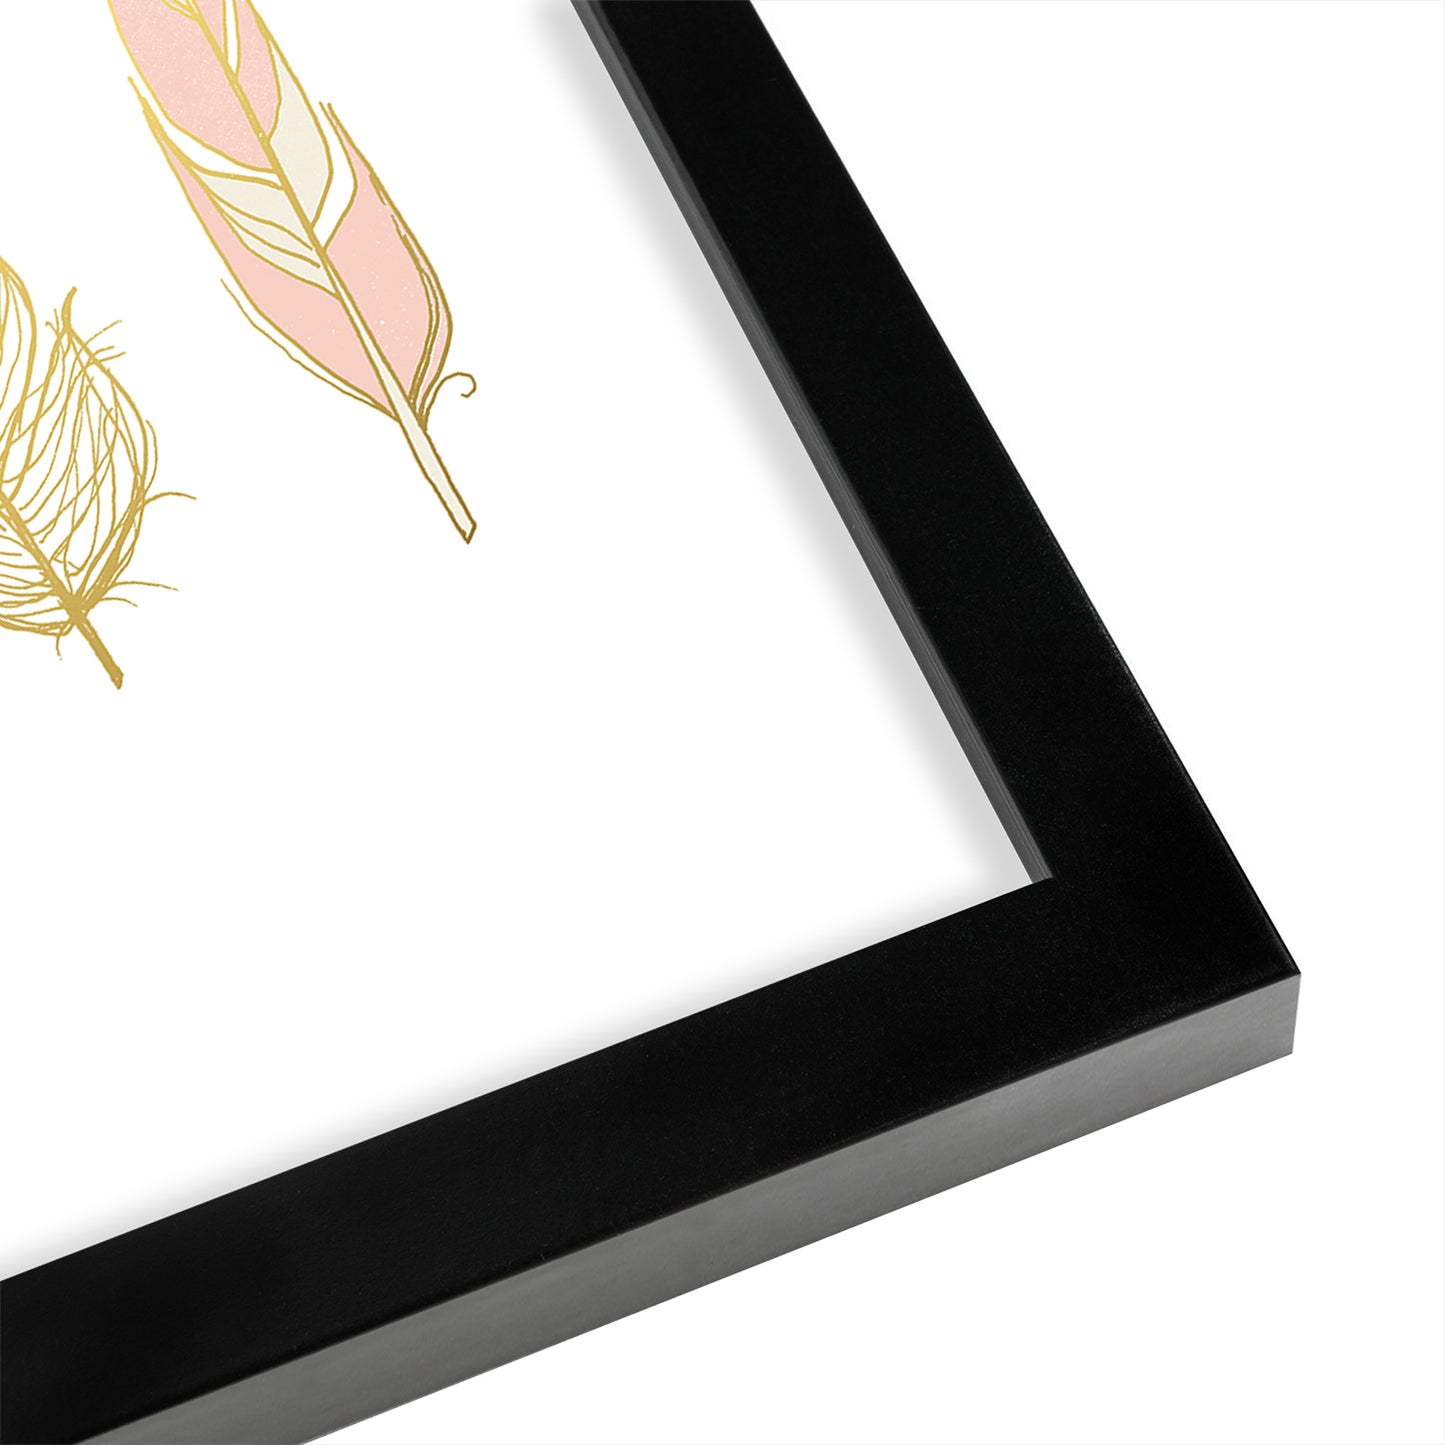 Three Feathers In Gold By Wall + Wonder - Framed Print